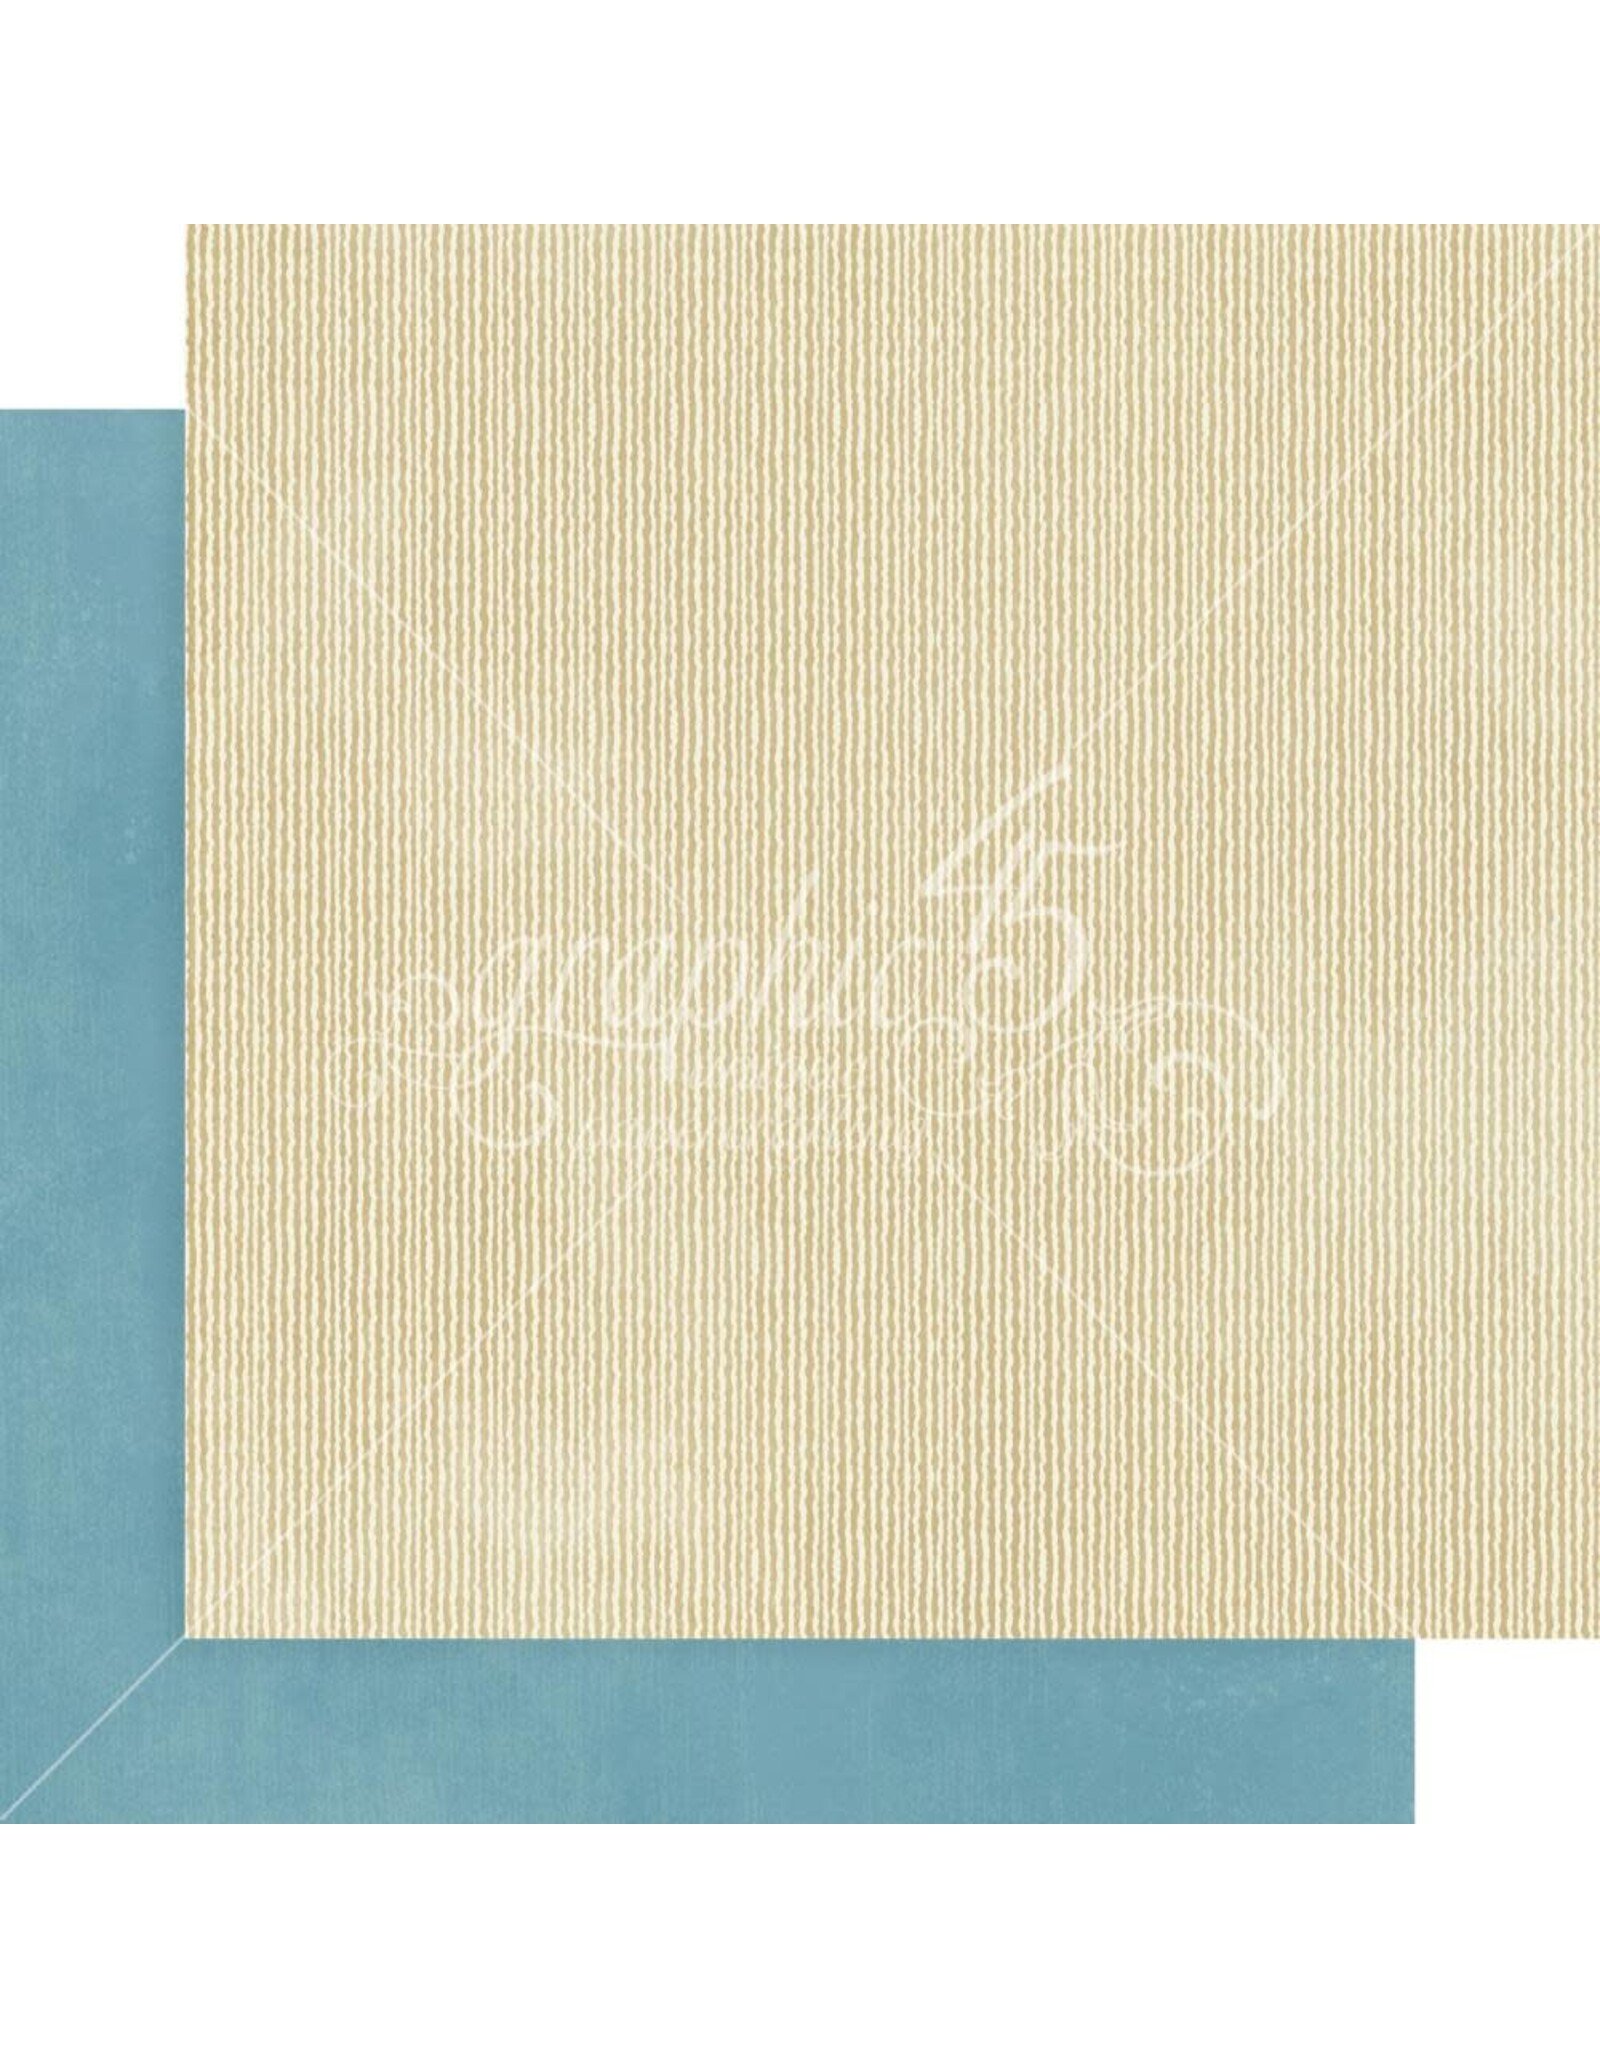 GRAPHIC 45 GRAPHIC 45 THE BEACH IS CALLING COLLECTION 12x12 PATTERNS & SOLIDS PACK 16 SHEETS